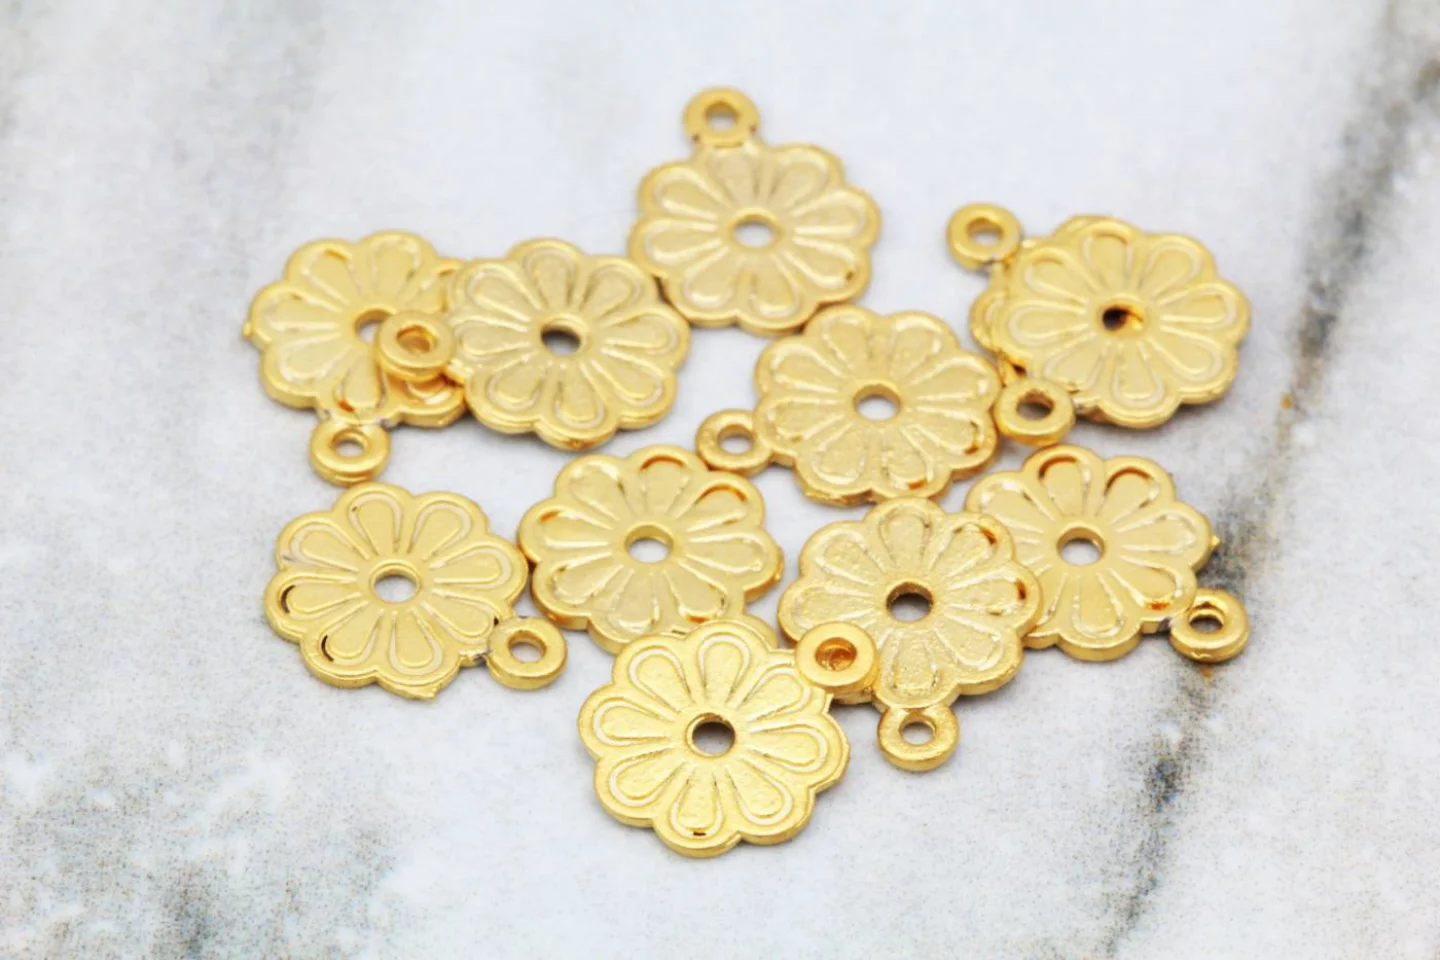 gold-metal-daisy-floral-pendant-charms.